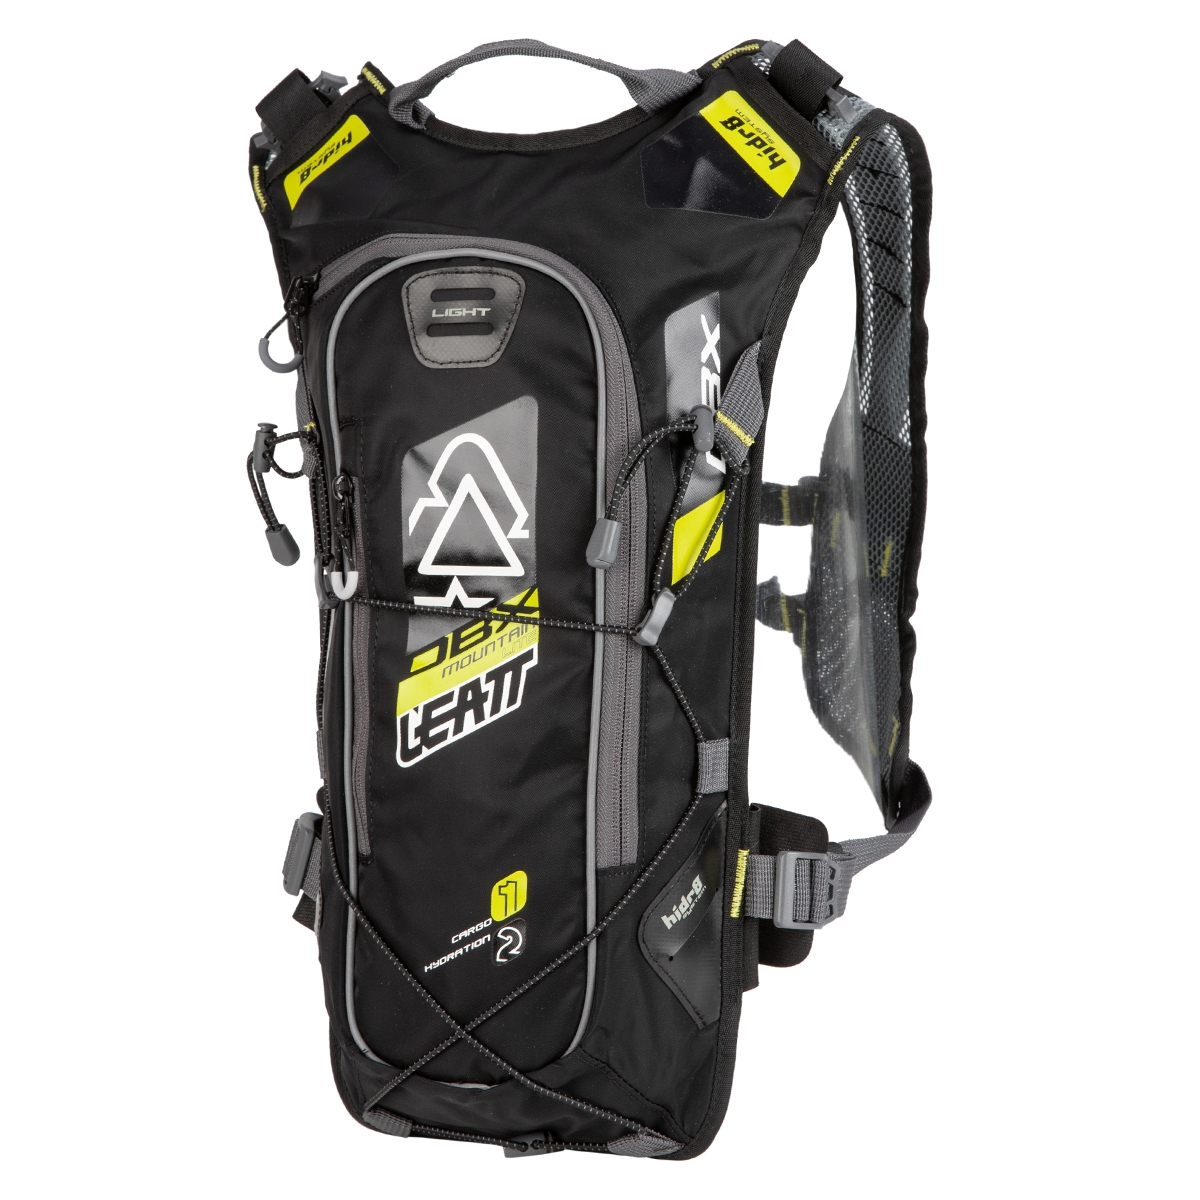 Leatt Backpack with Hydration System Hydration Mountain Lite WP 2.0 DBX incl. Back Protector, Lime/Black,2 L